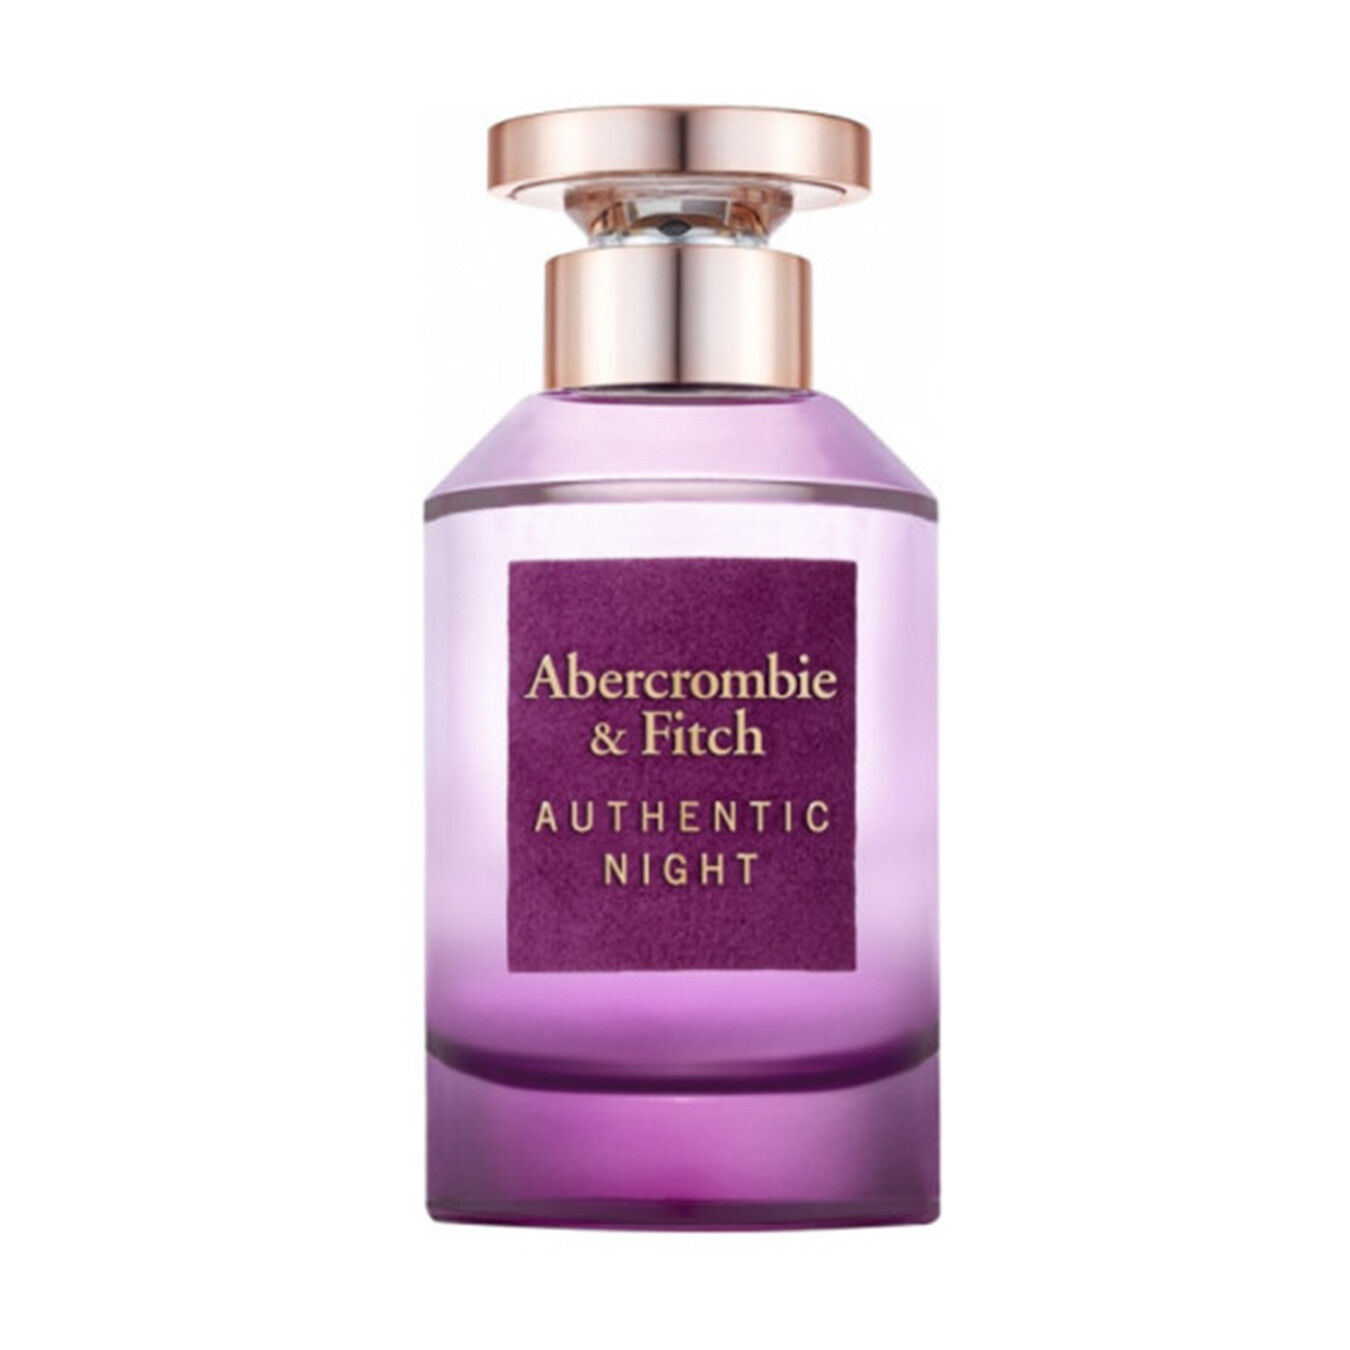 Abercrombie & Fitch Authentic Night AUTHENTIC Night Femme Perfume Femme 100 ml